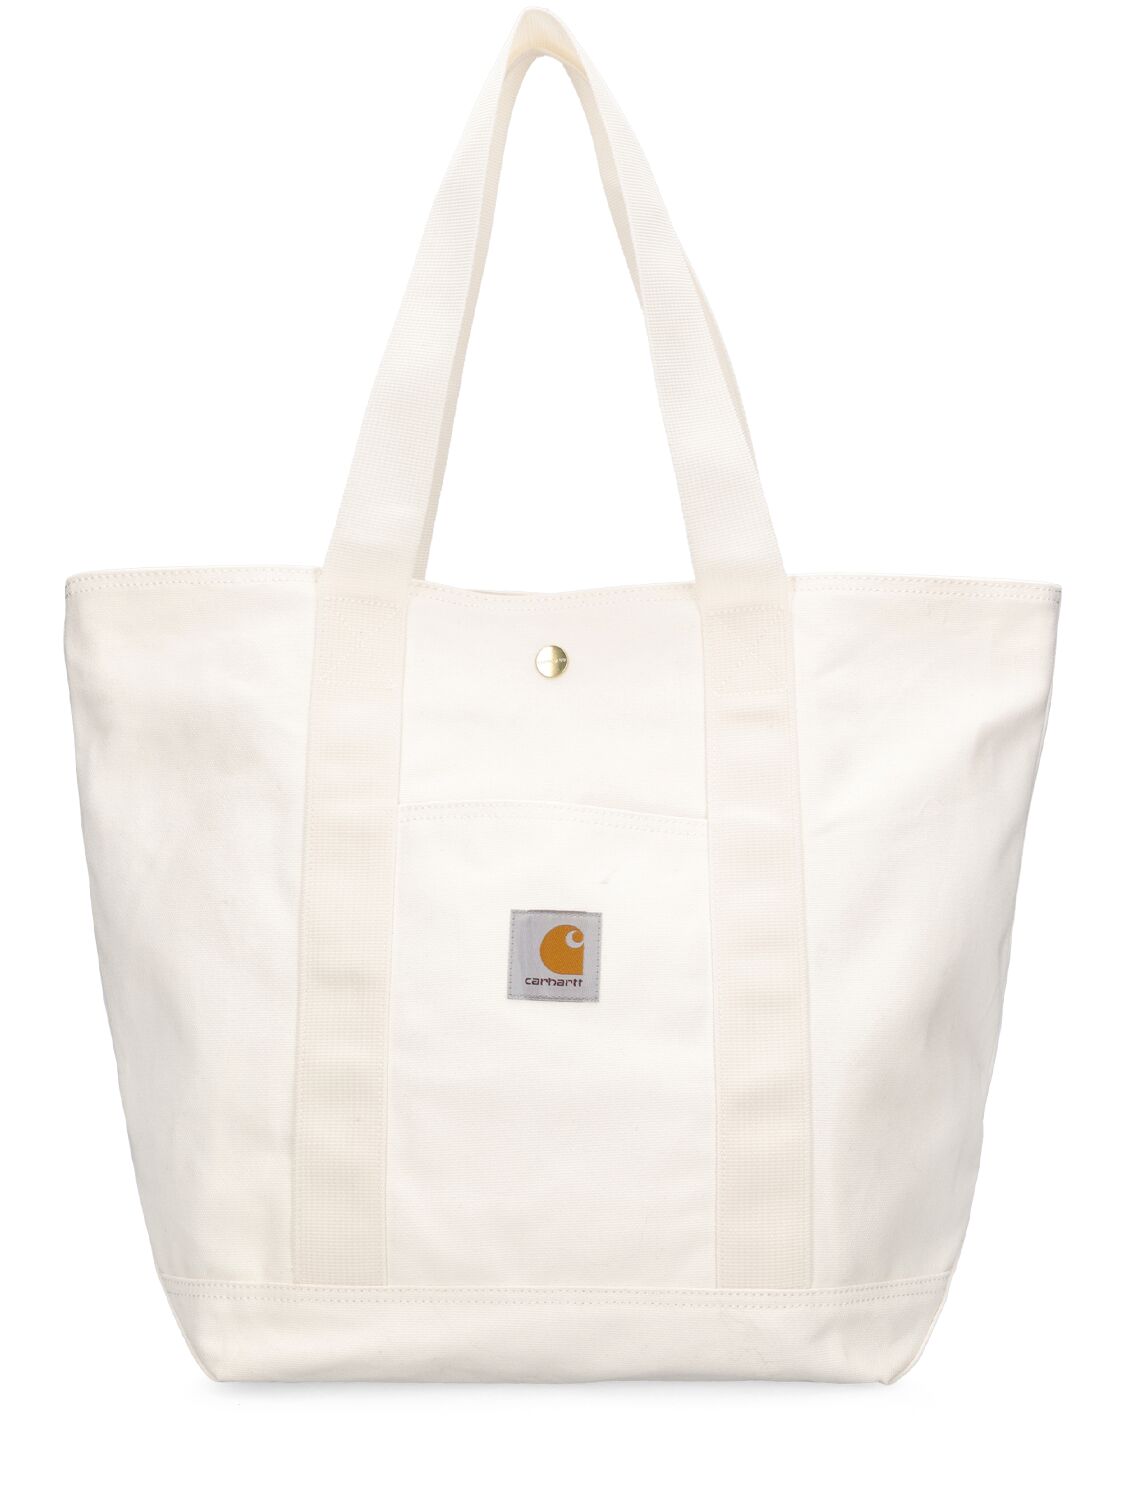 Carhartt Rinsed Canvas Tote Bag In Wax